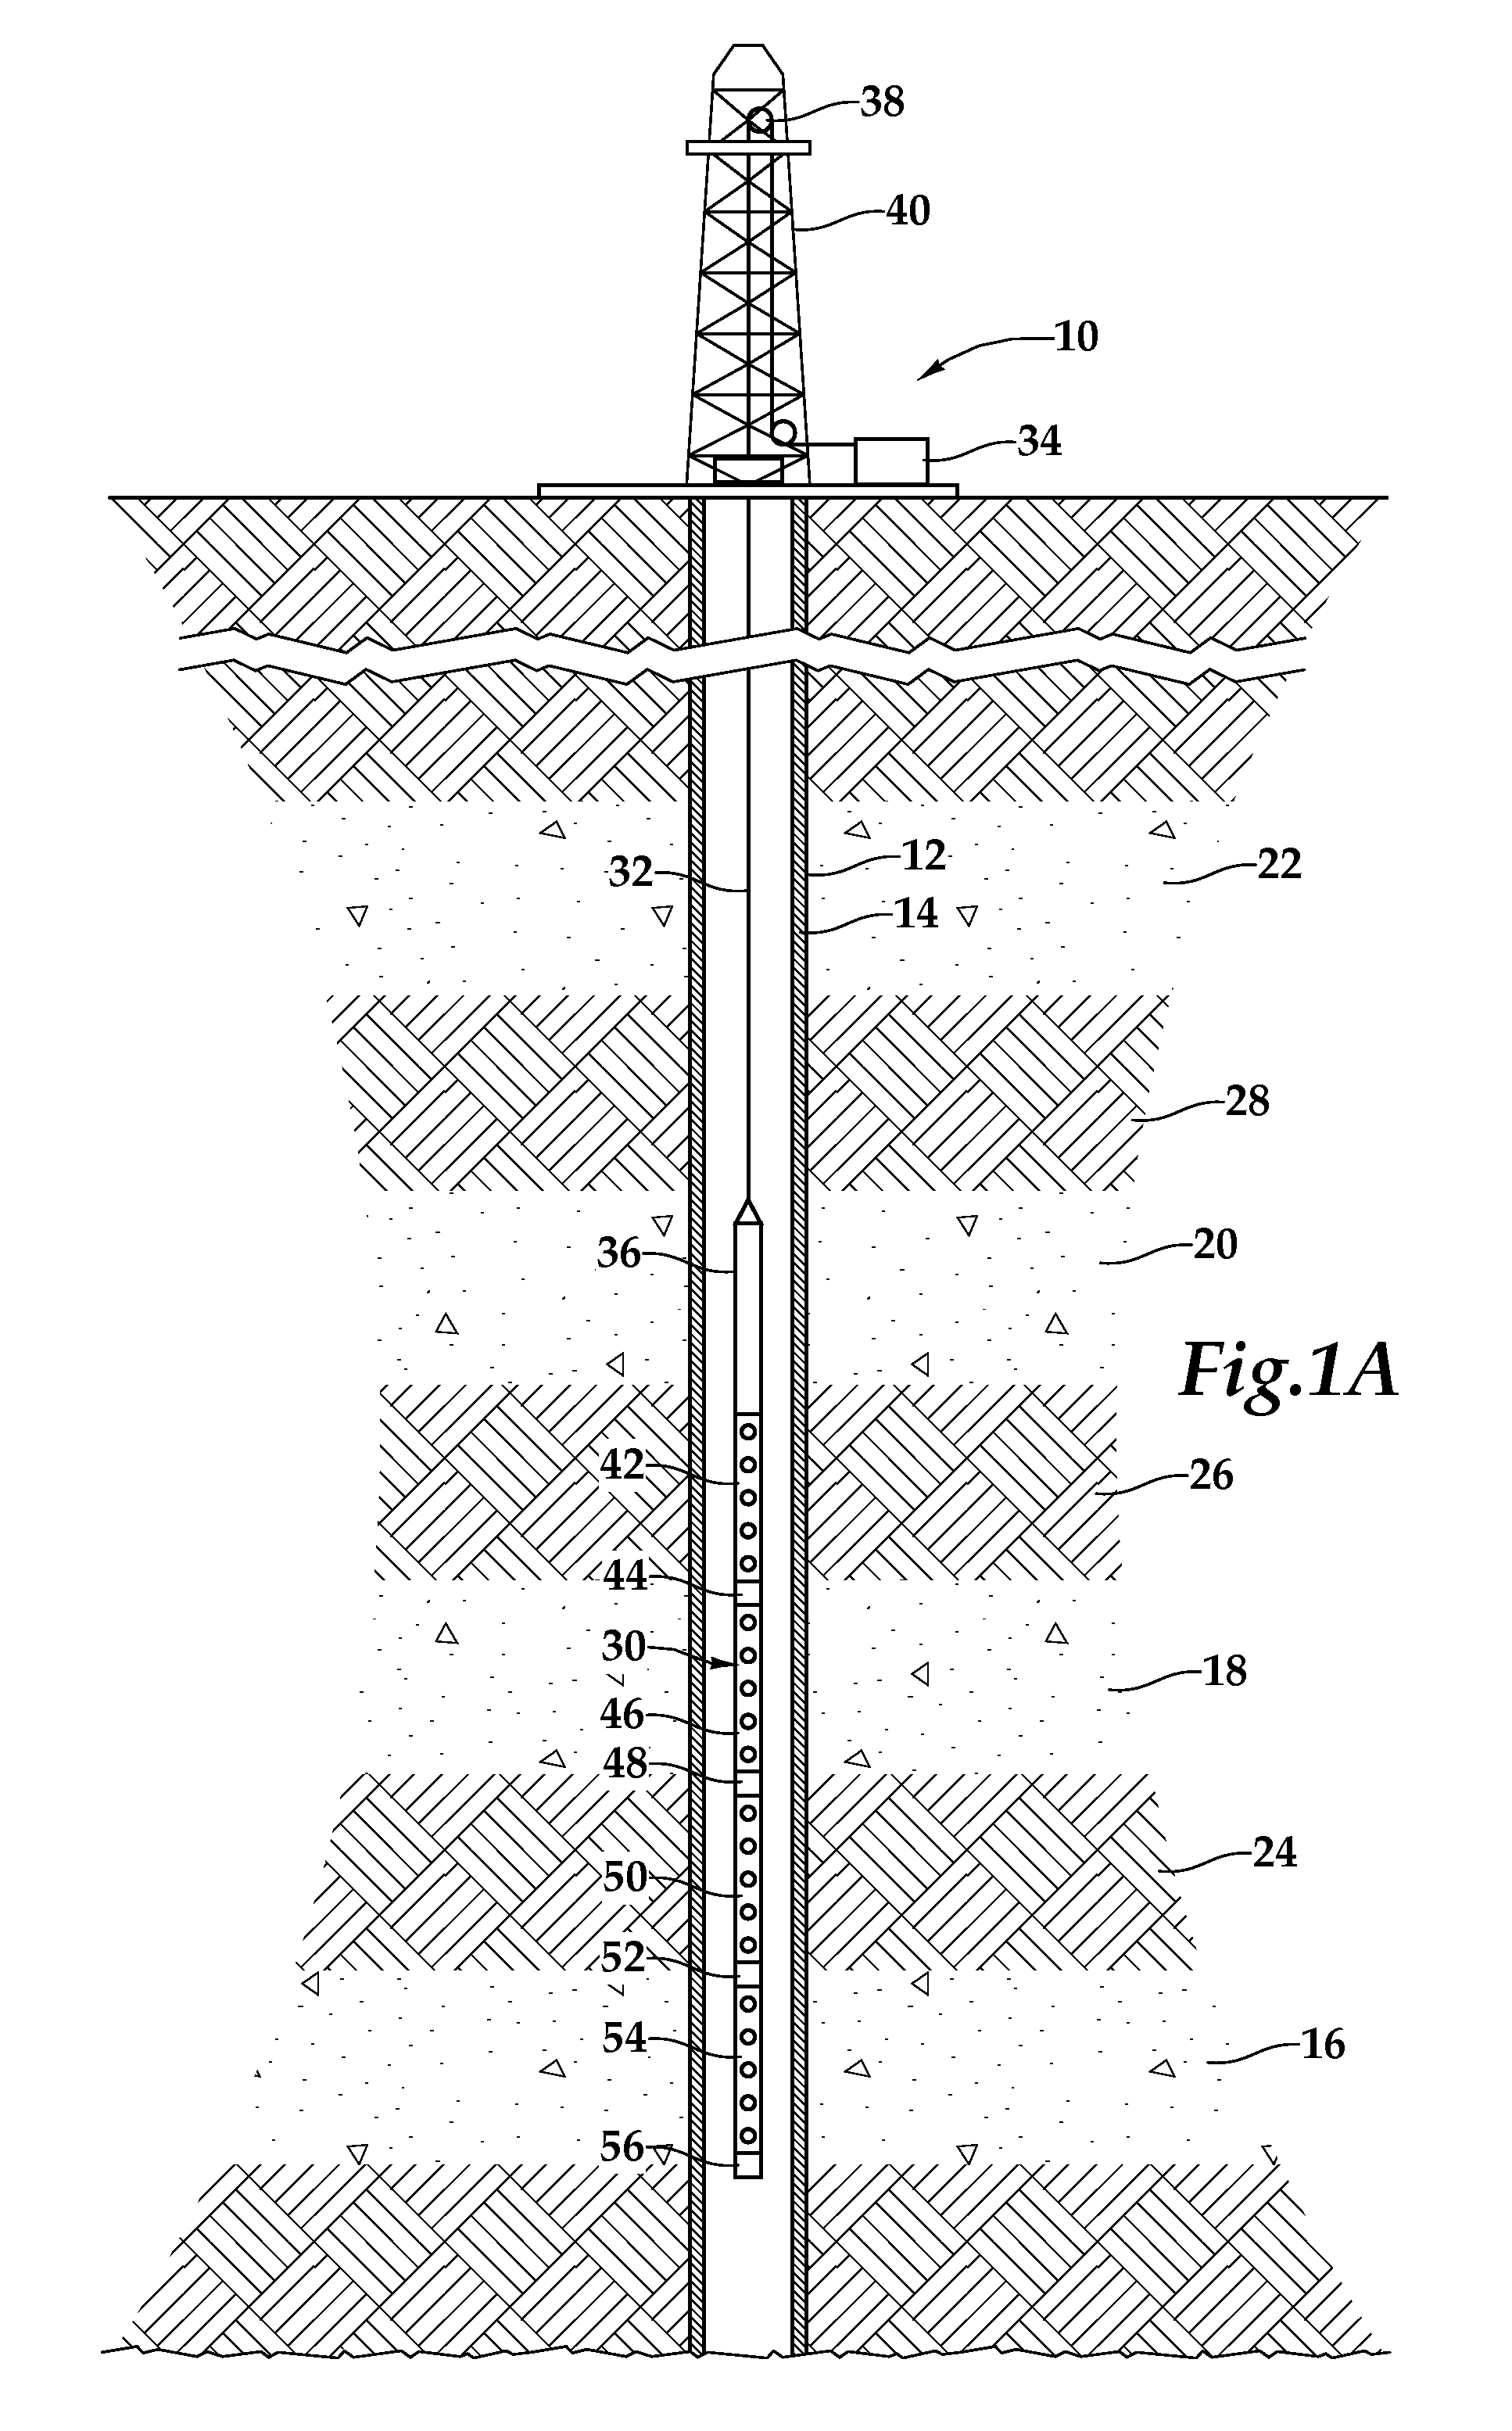 System and Method for Selective Activation of Downhole Devices in a Tool String